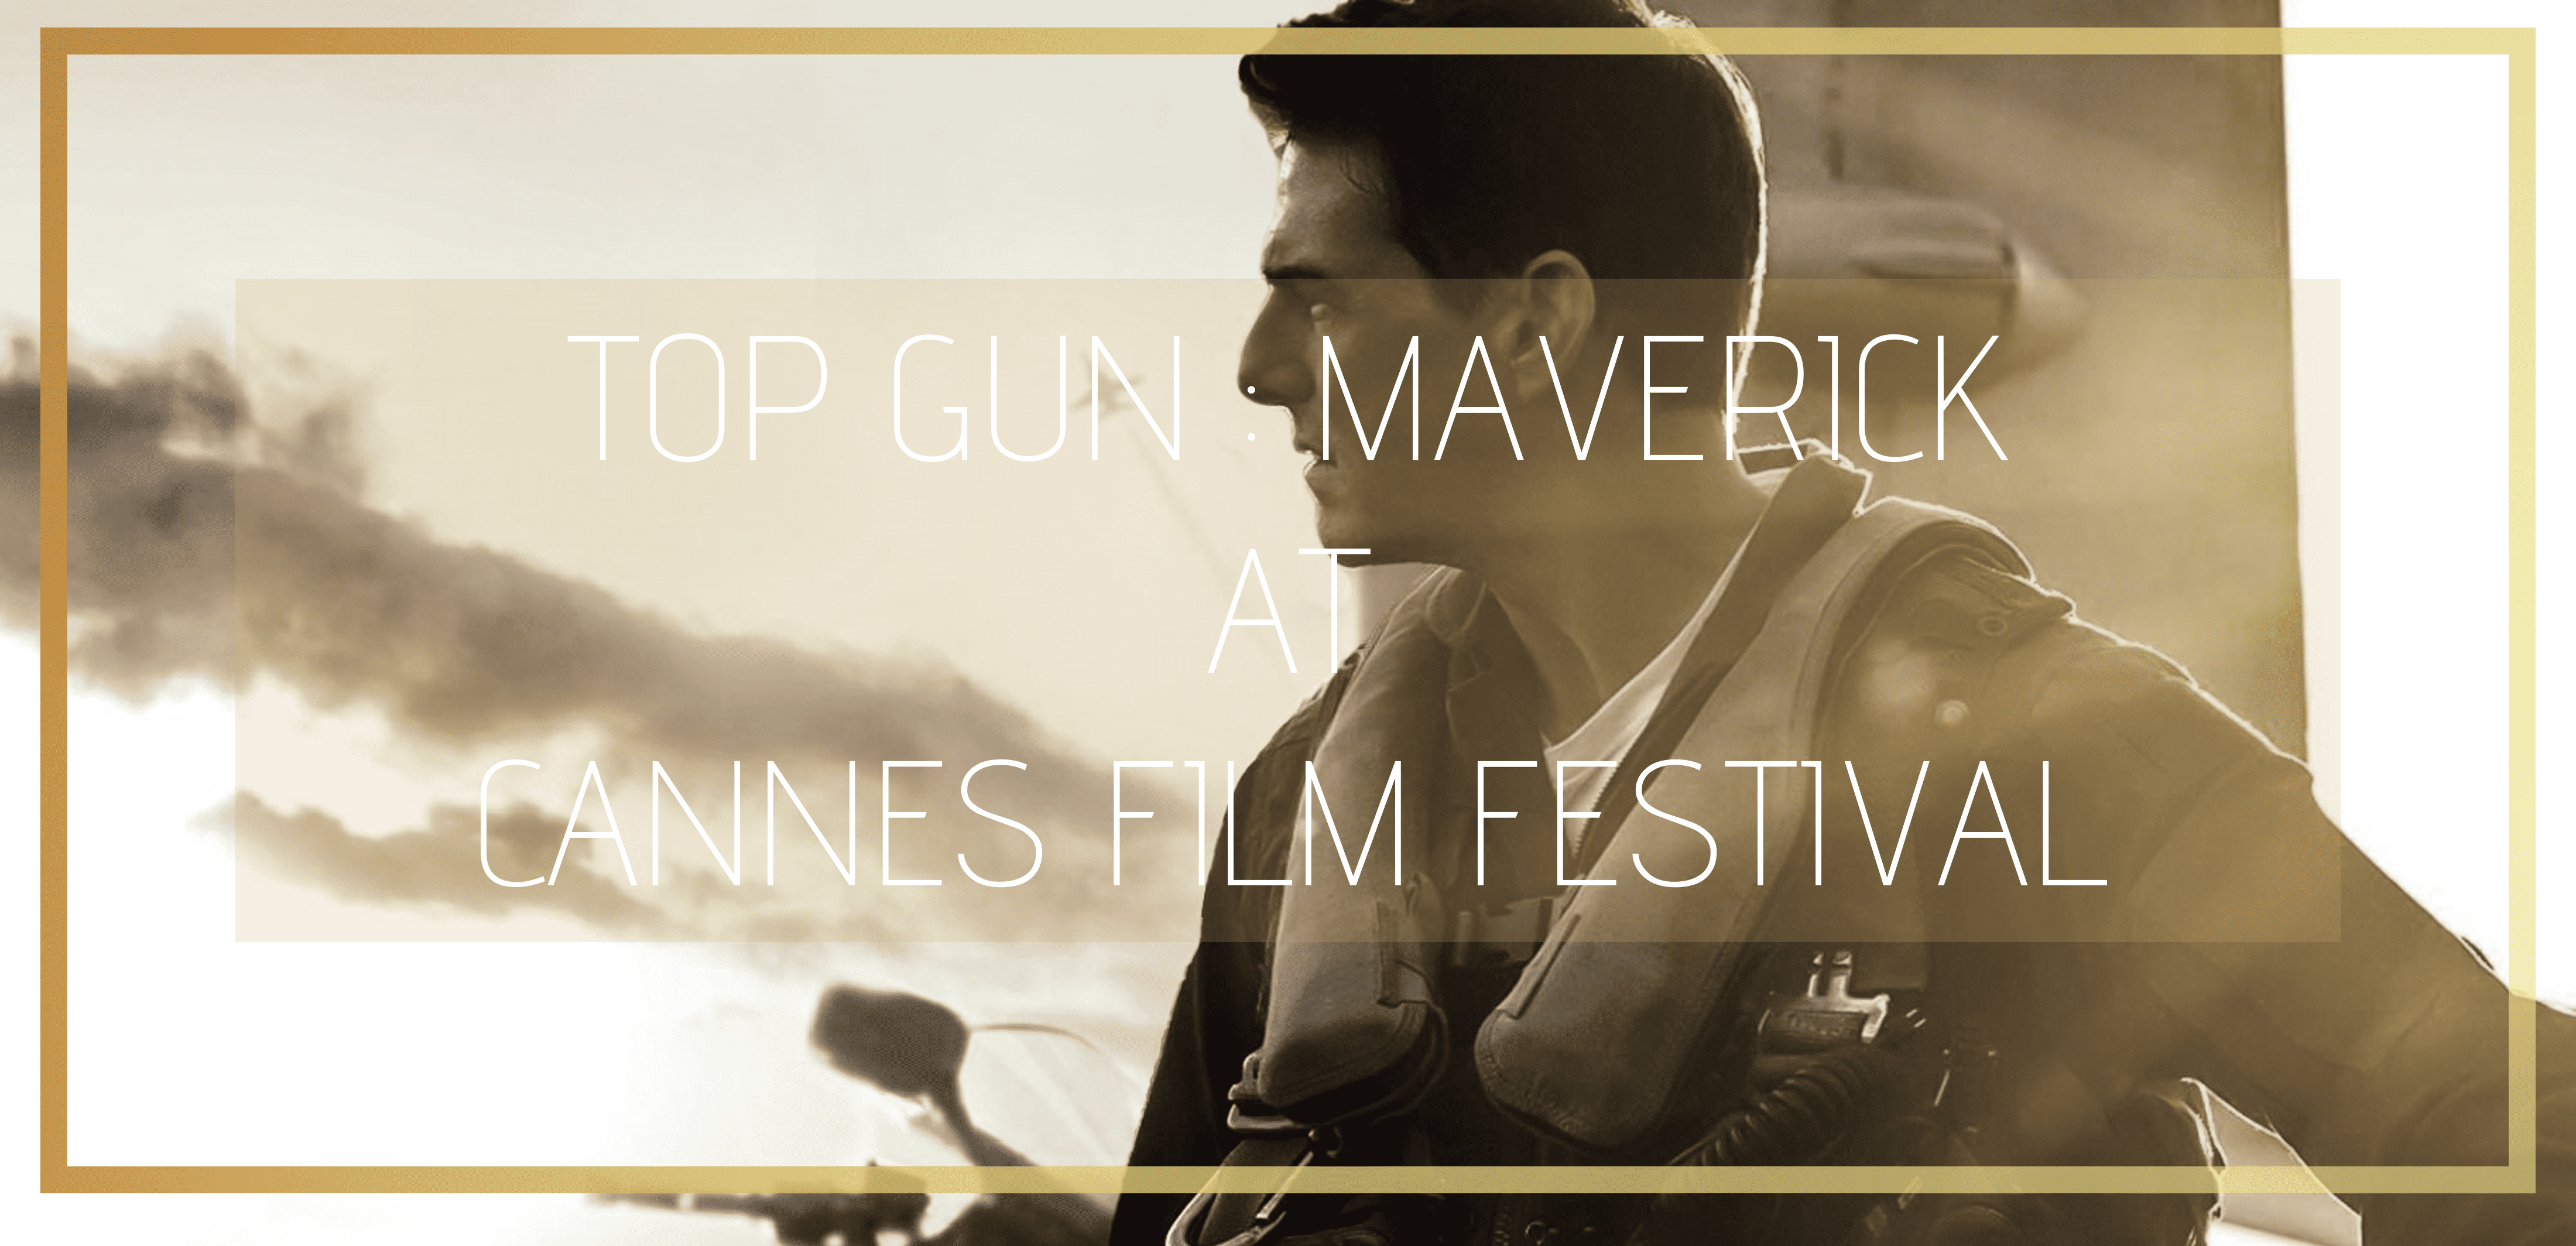 how do i buy tickets for tom cruise top gun premiere at cannes film festival on may 18